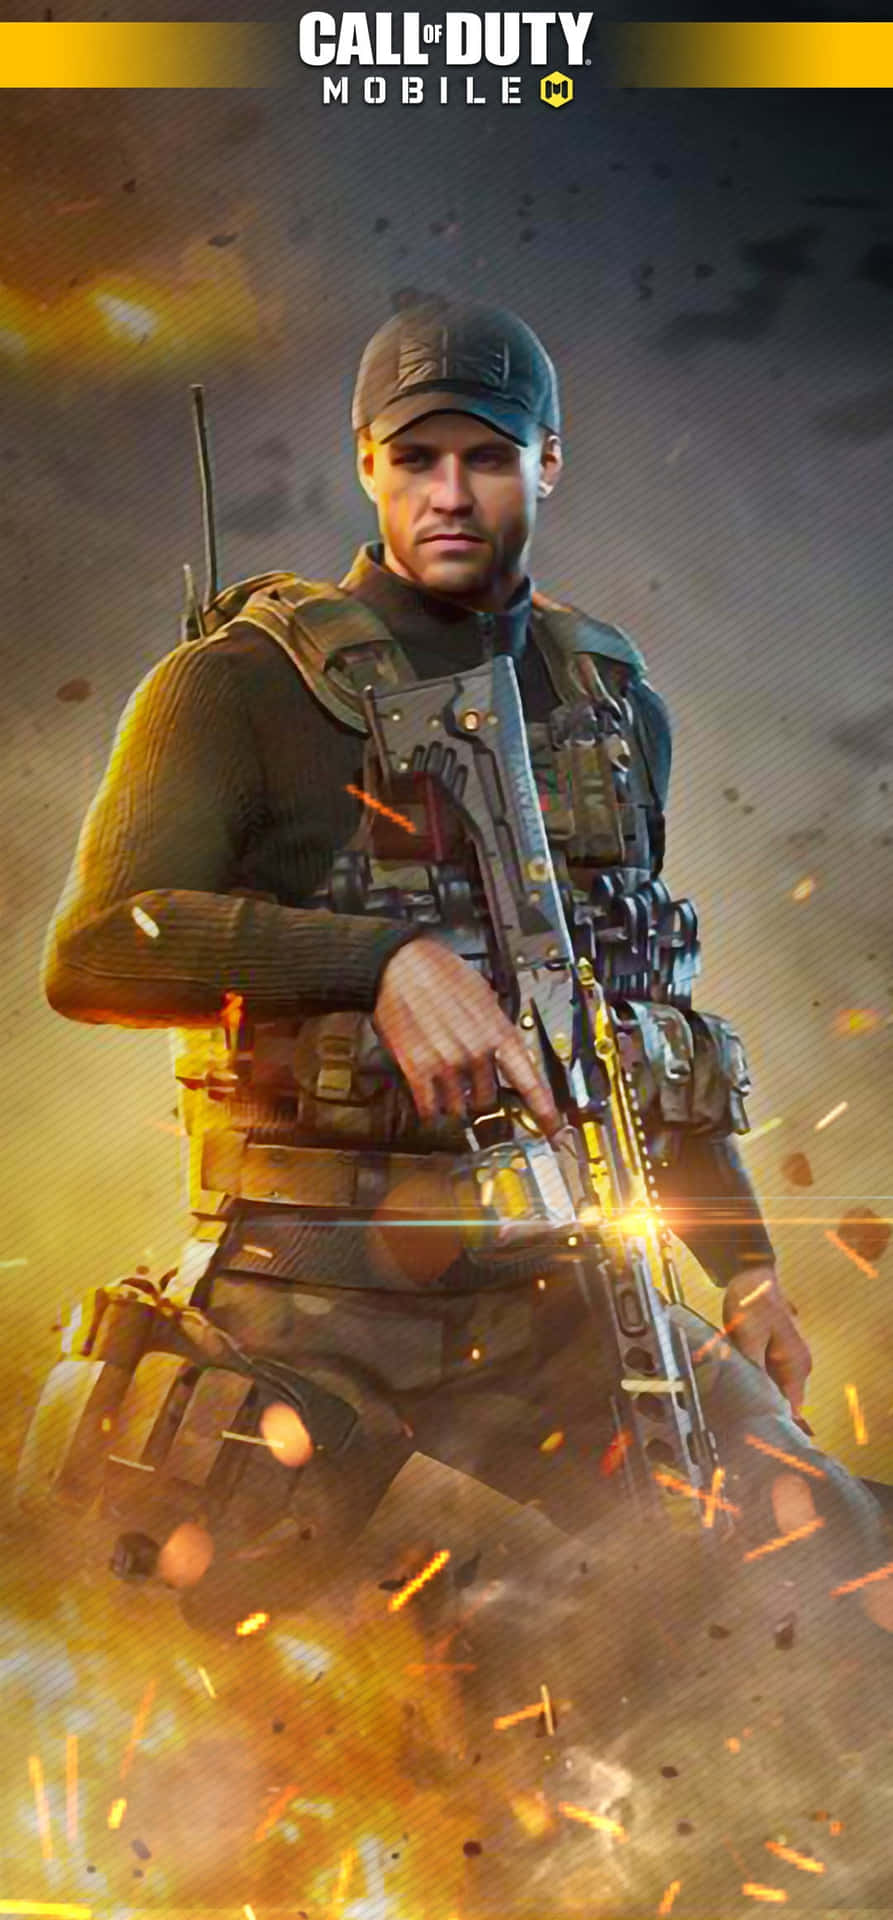 Video Game Call of Duty Mobile 4k Ultra HD Wallpaper